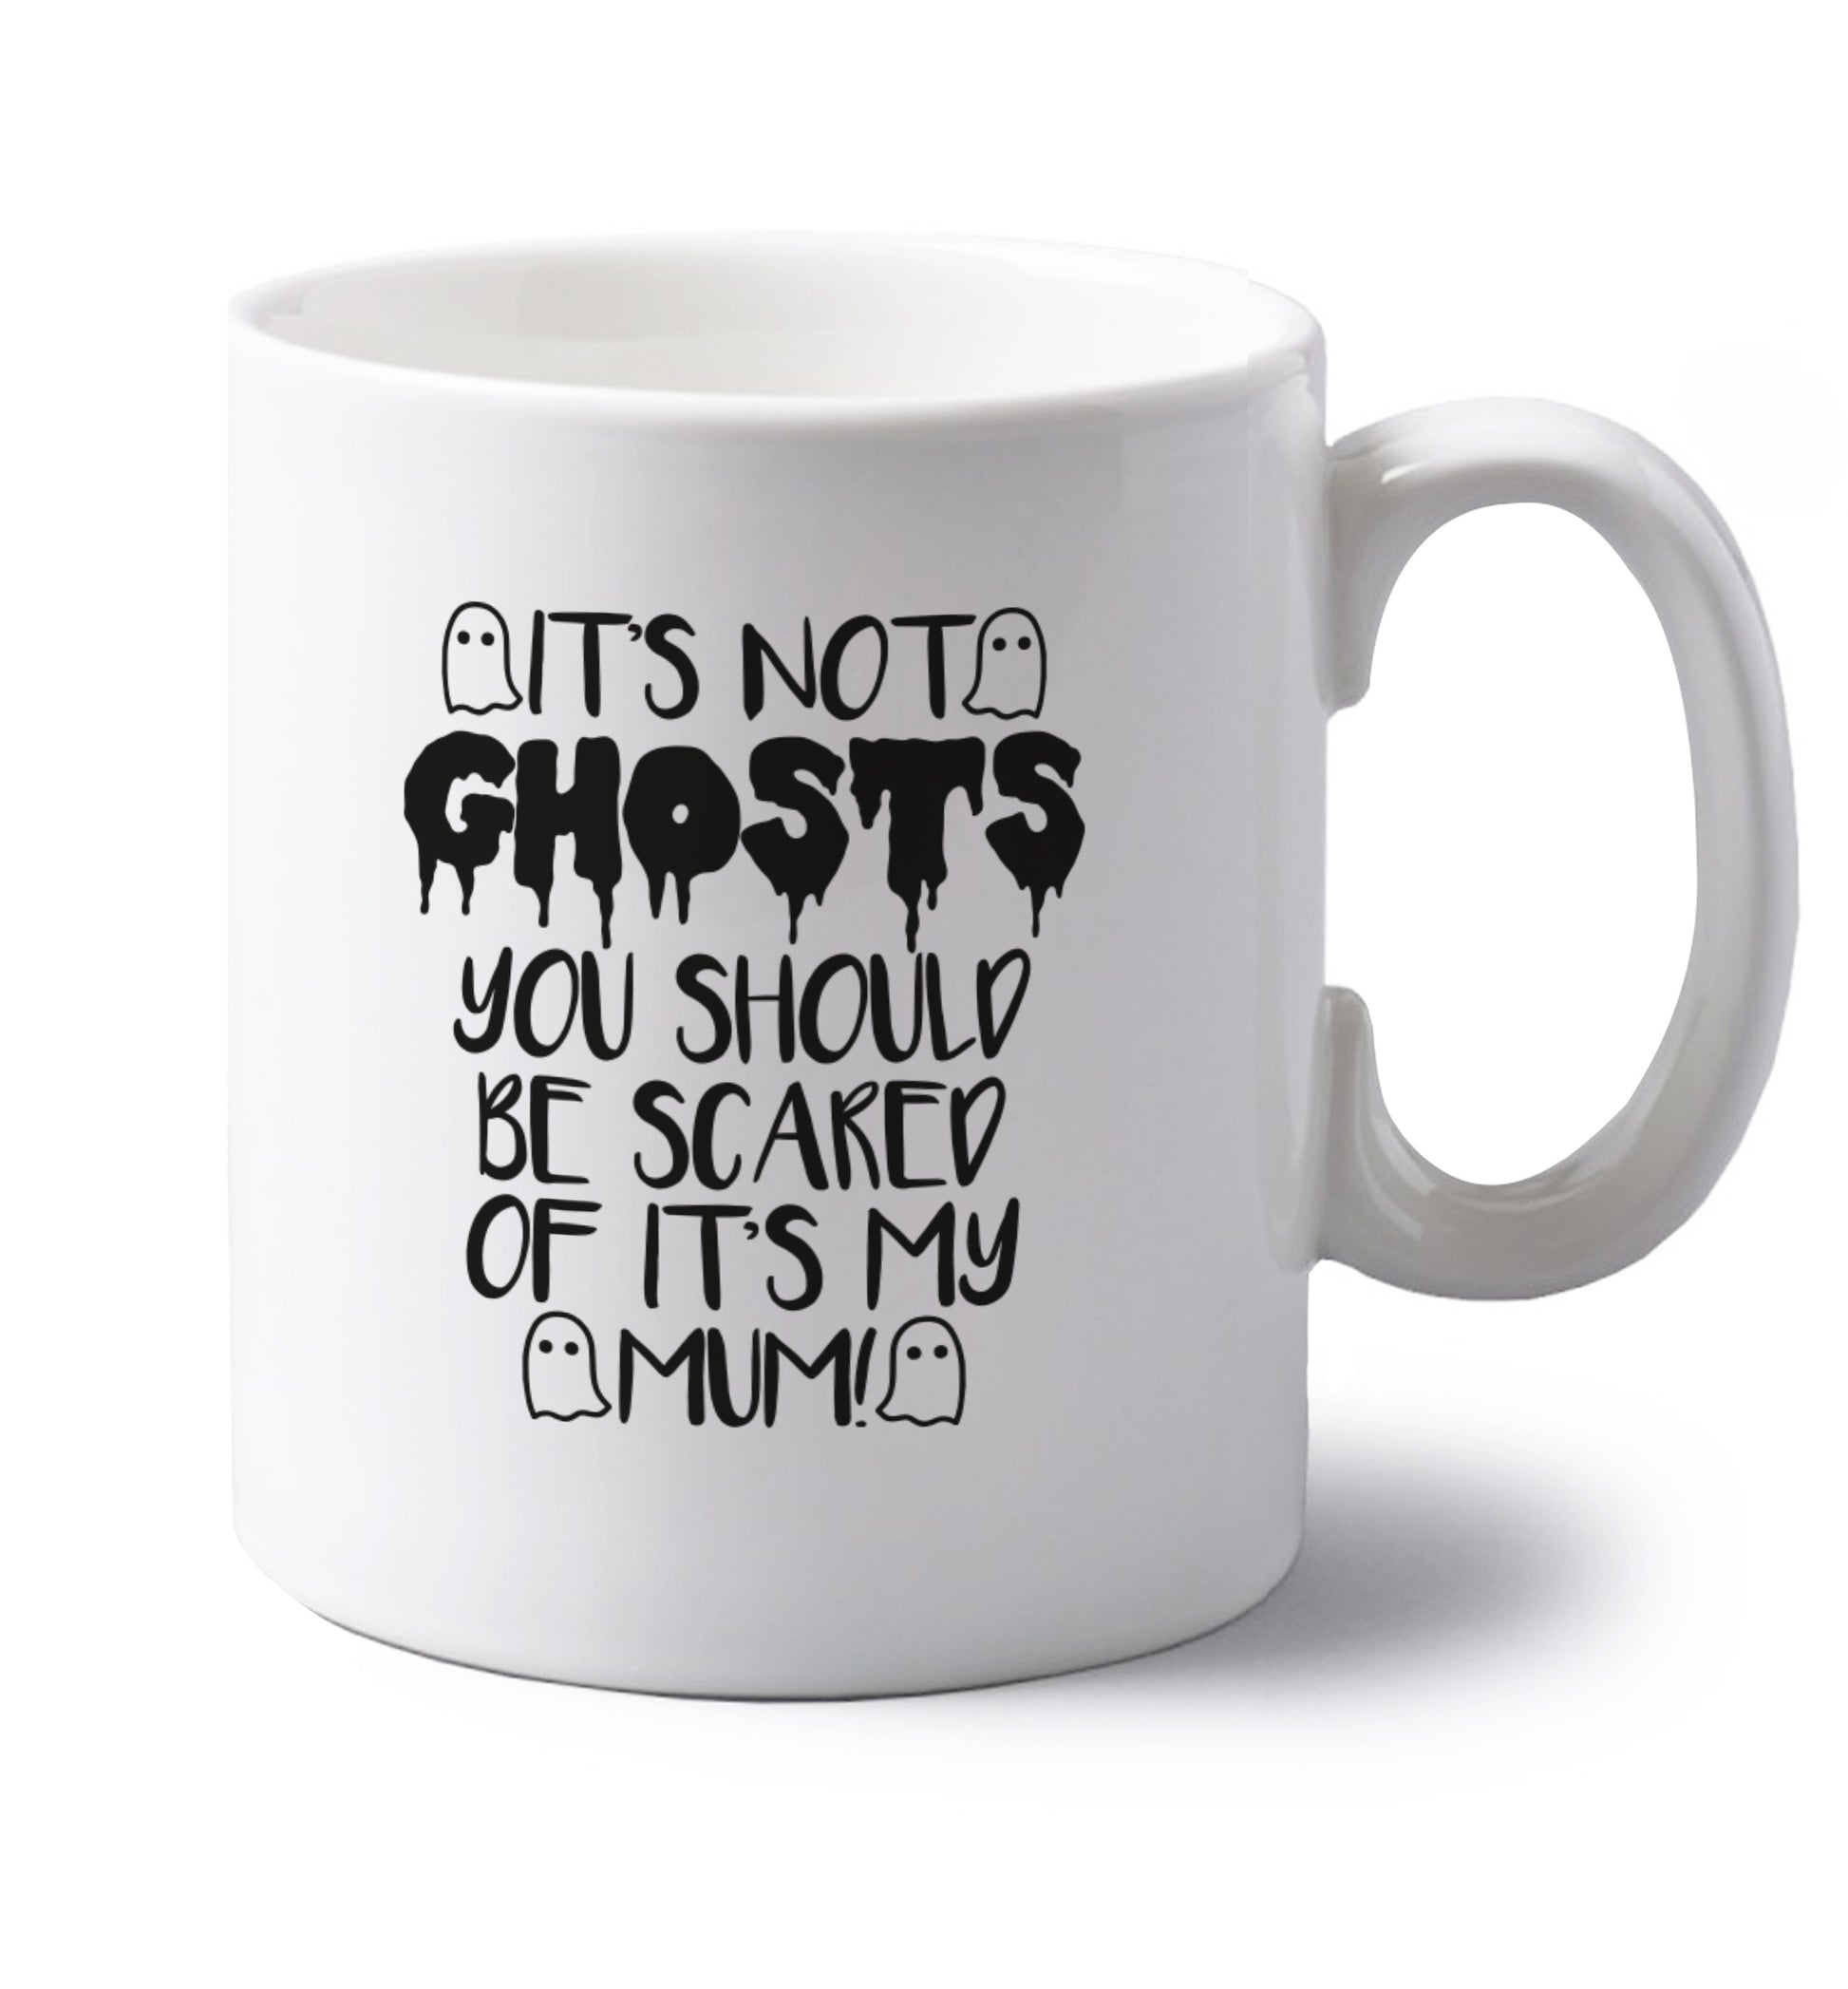 It's not ghosts you should be scared of it's my mum! left handed white ceramic mug 